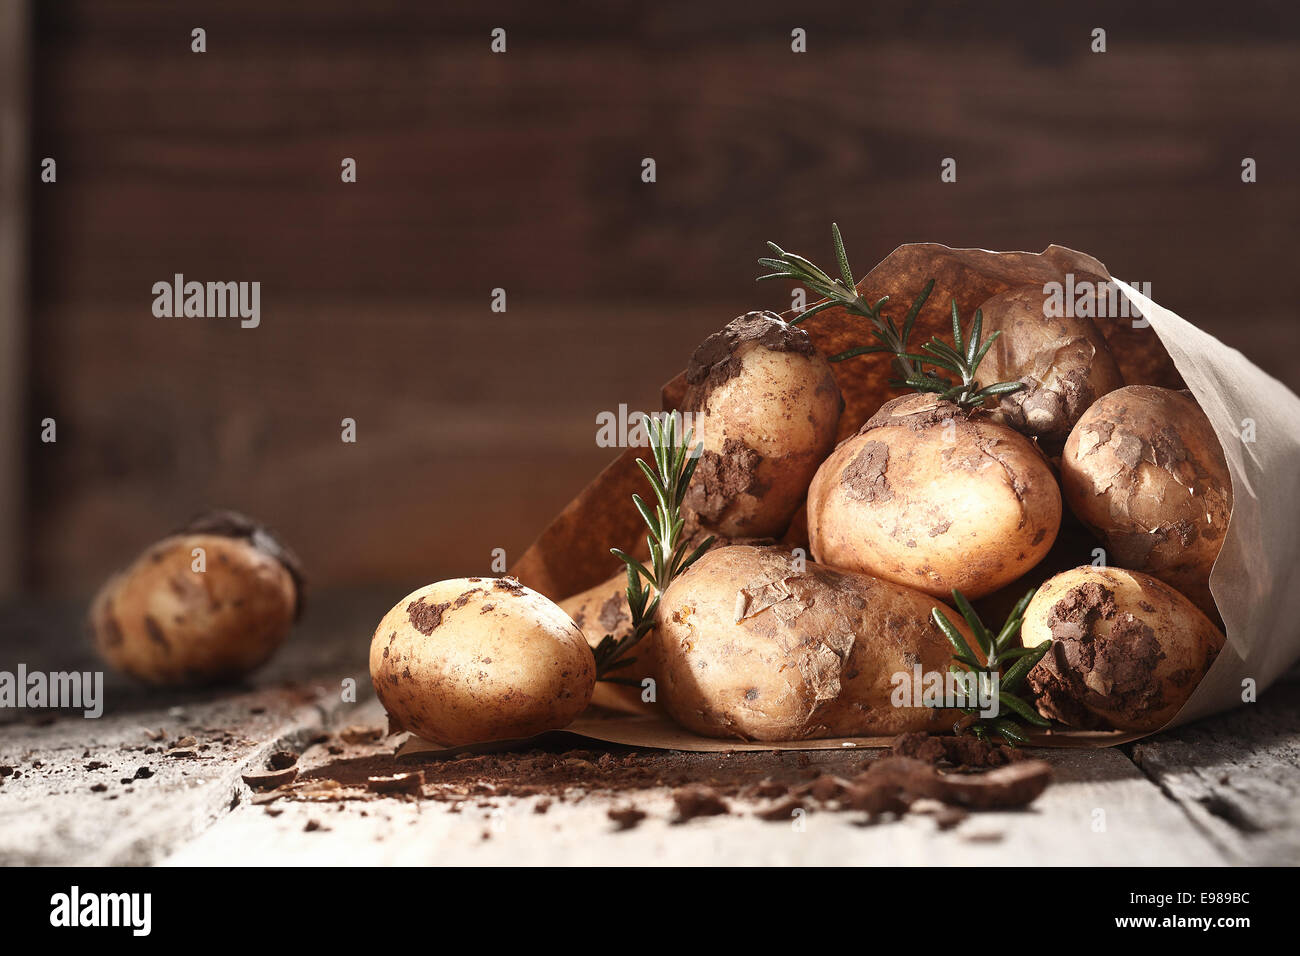 Farm fresh unwashed potatoes with sprigs of fresh rosemary spillijng out of a brown paper bag onto a wooden table at a farmers market Stock Photo